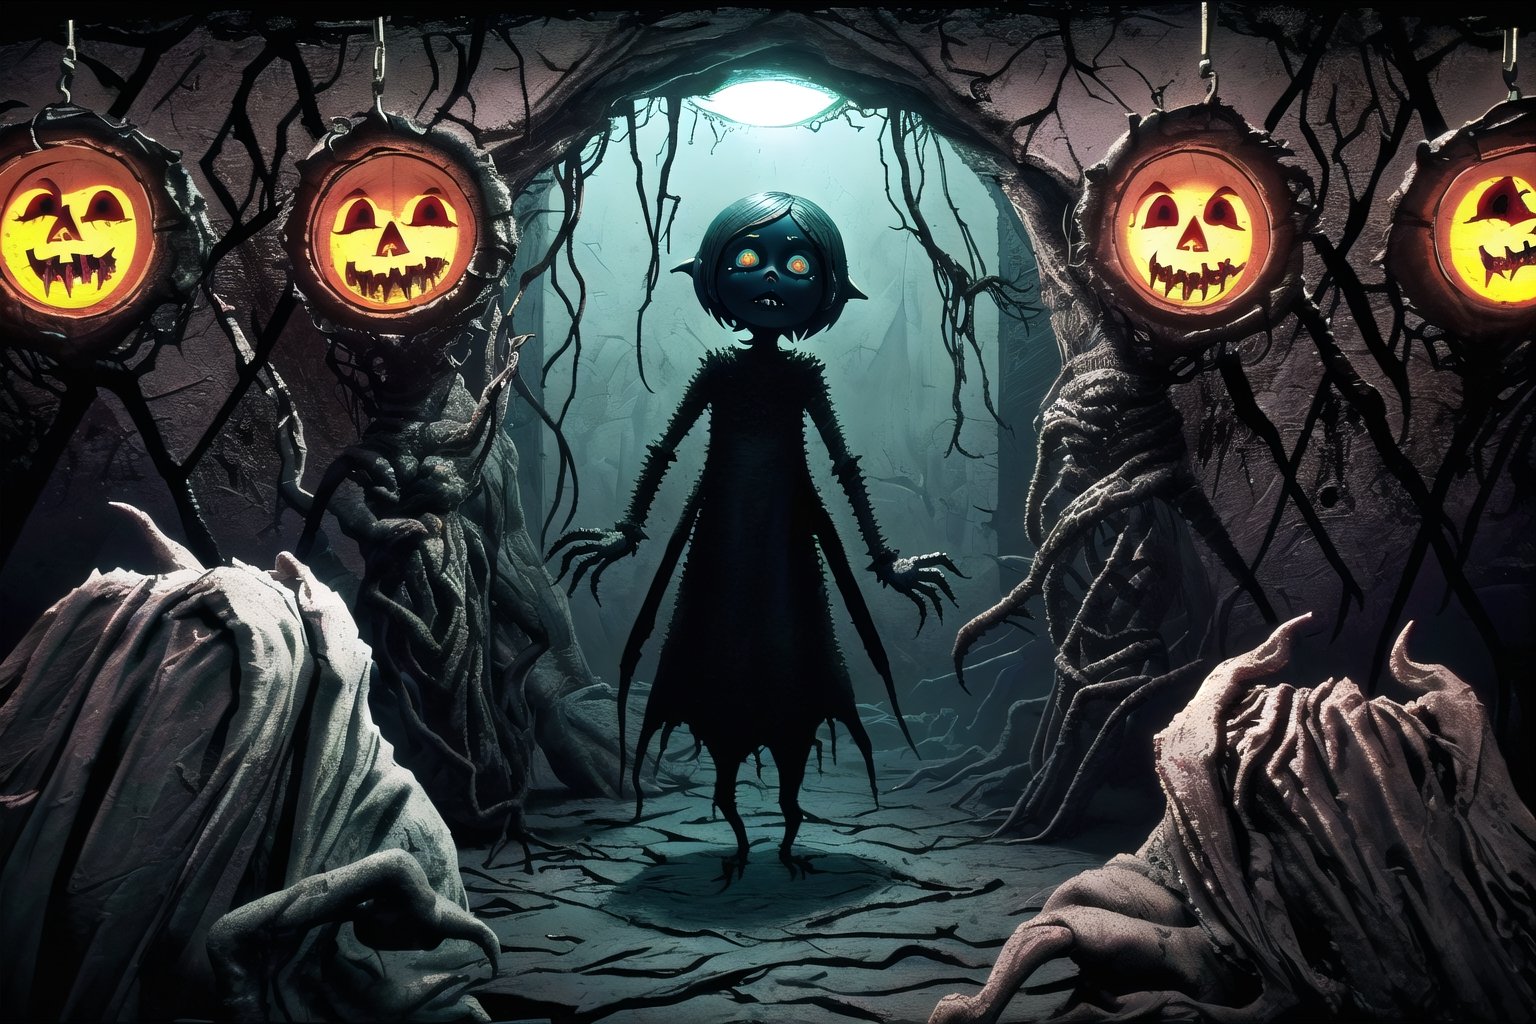 (masterpiece, high resolution, claymation:1.2), (stop motion:1.1), (dark and creepy atmosphere:1.2), (Coraline-inspired:1.1), (horror theme:1.2), (fantastic lighting:1.2), (detailed set design:1.1), (spooky characters:1.2), (haunting shadows:1.1), (sinister dolls:1.2), (twisted narrative:1.1), sharp focus, (deep depth of field:1.4), (tilt shift:1.1), dramatic, (cinematic:1.2),RING